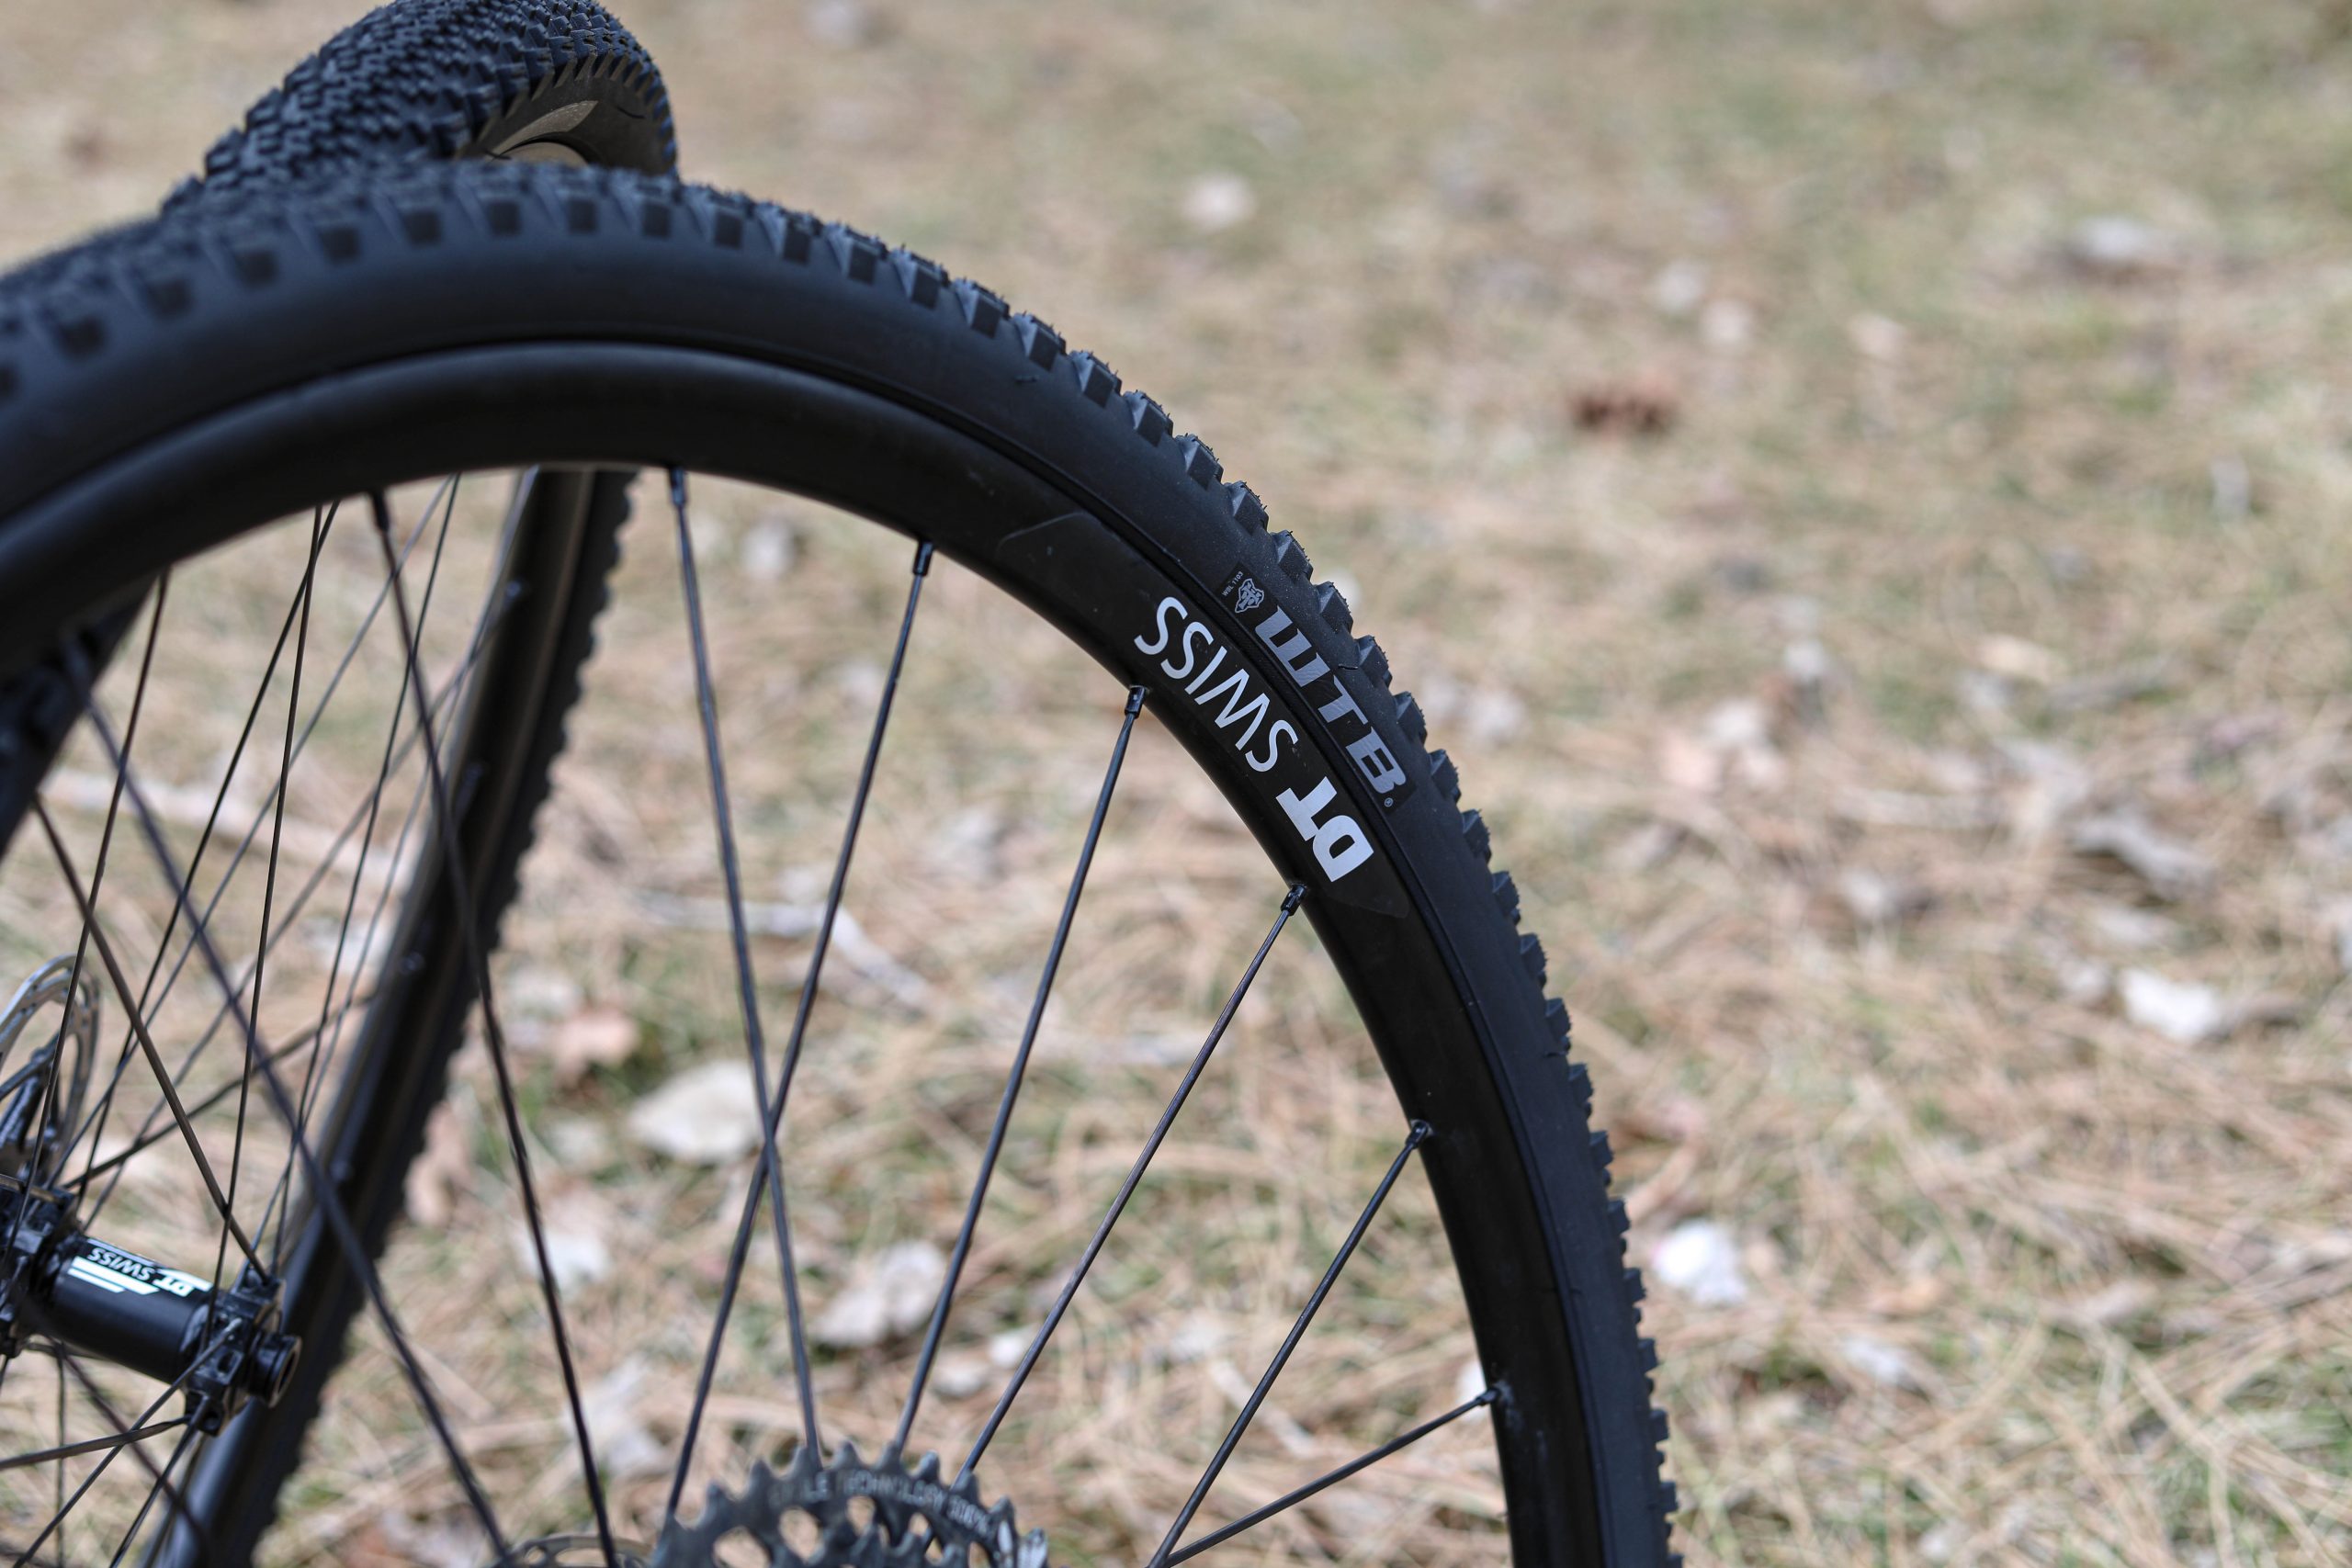 Tube vs Tubeless Tires: What should you ride?